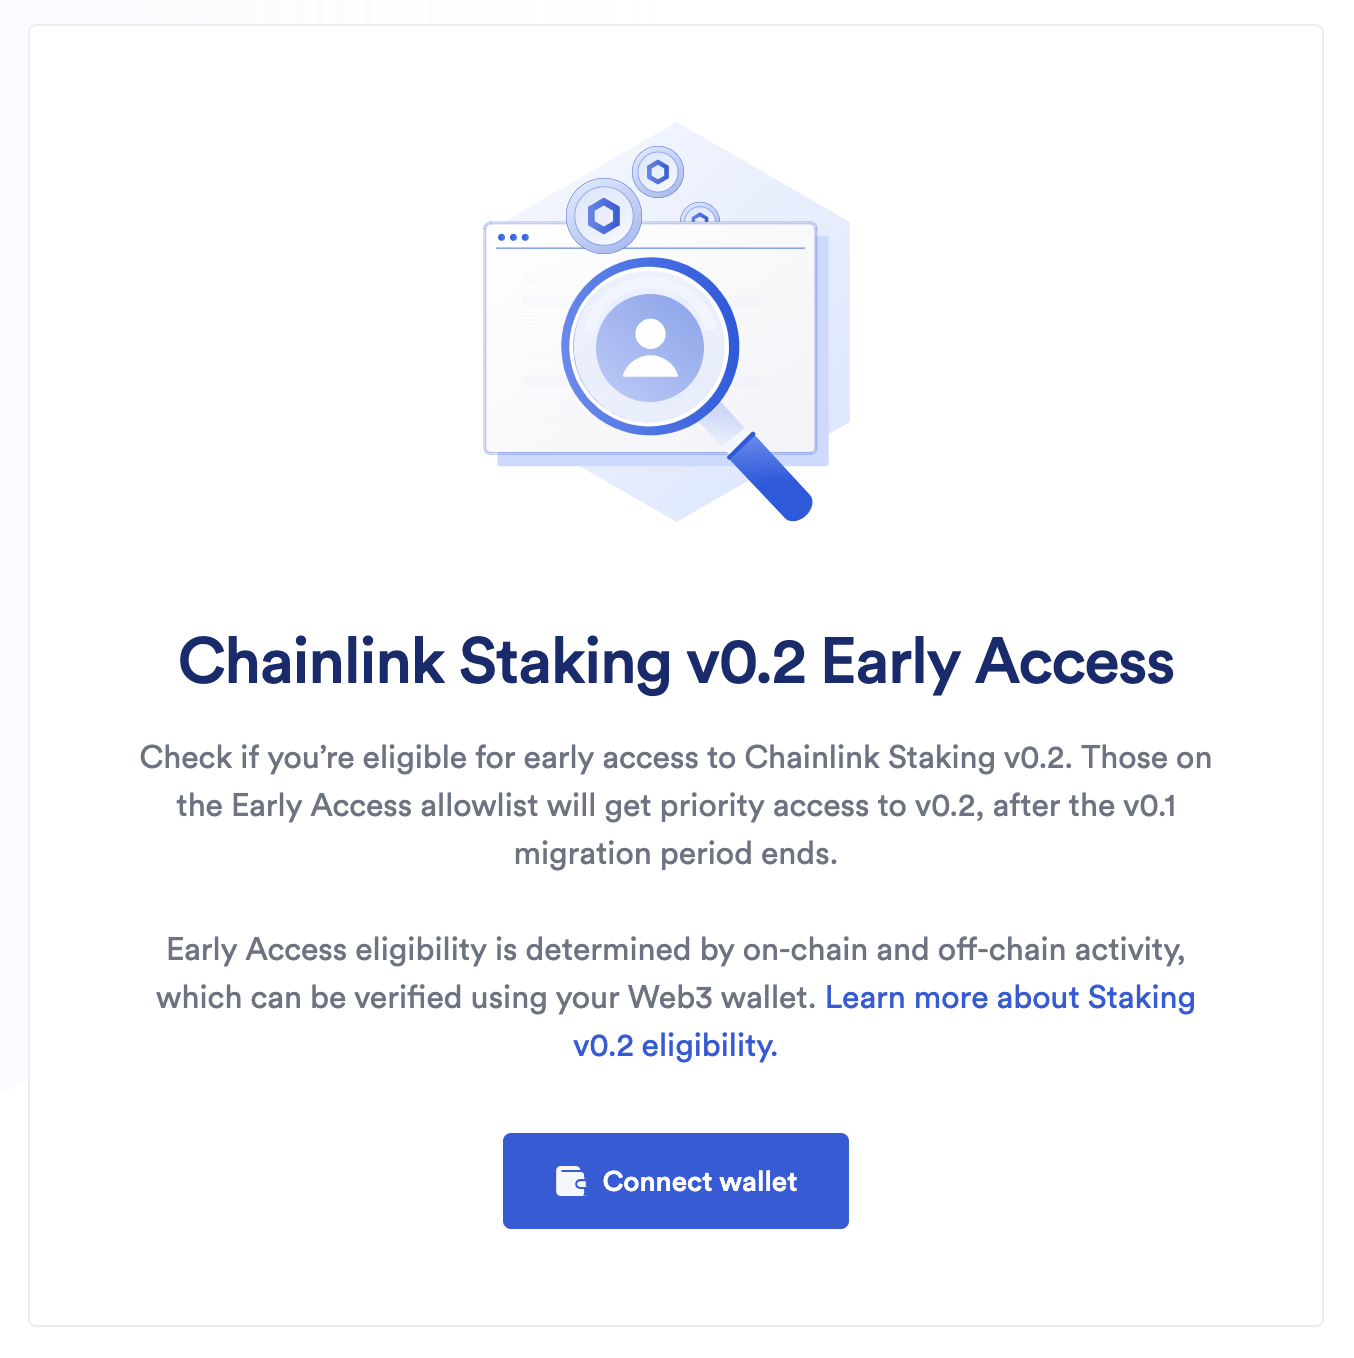 Chainlink Staking v0.2 Early Access Eligibility App.